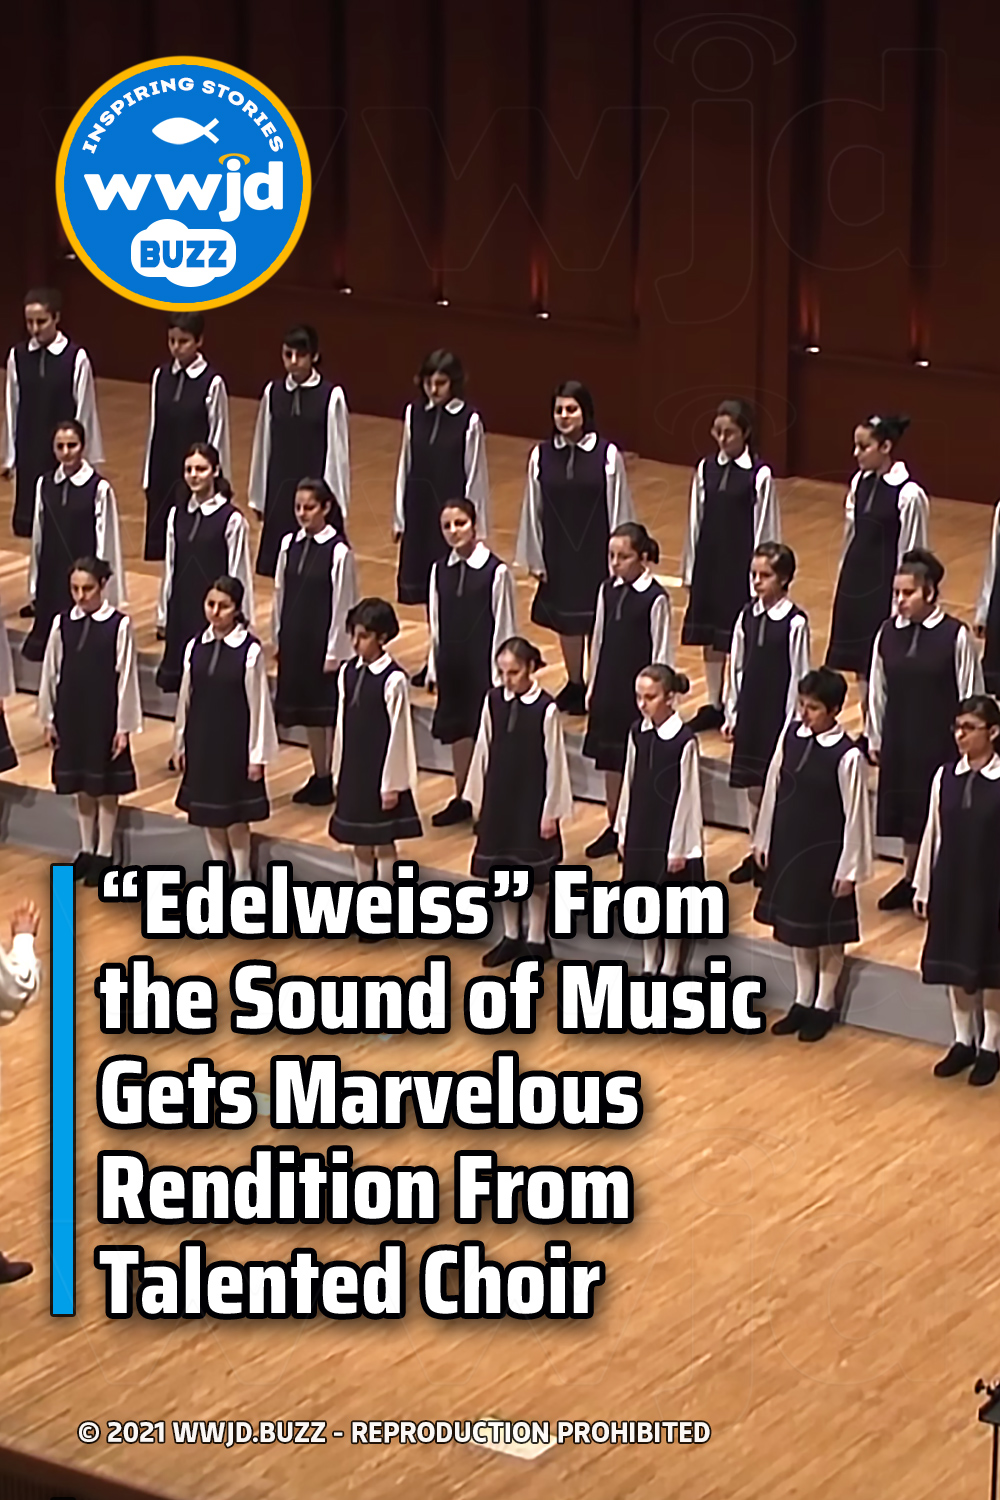 “Edelweiss” From the Sound of Music Gets Marvelous Rendition From Talented Choir